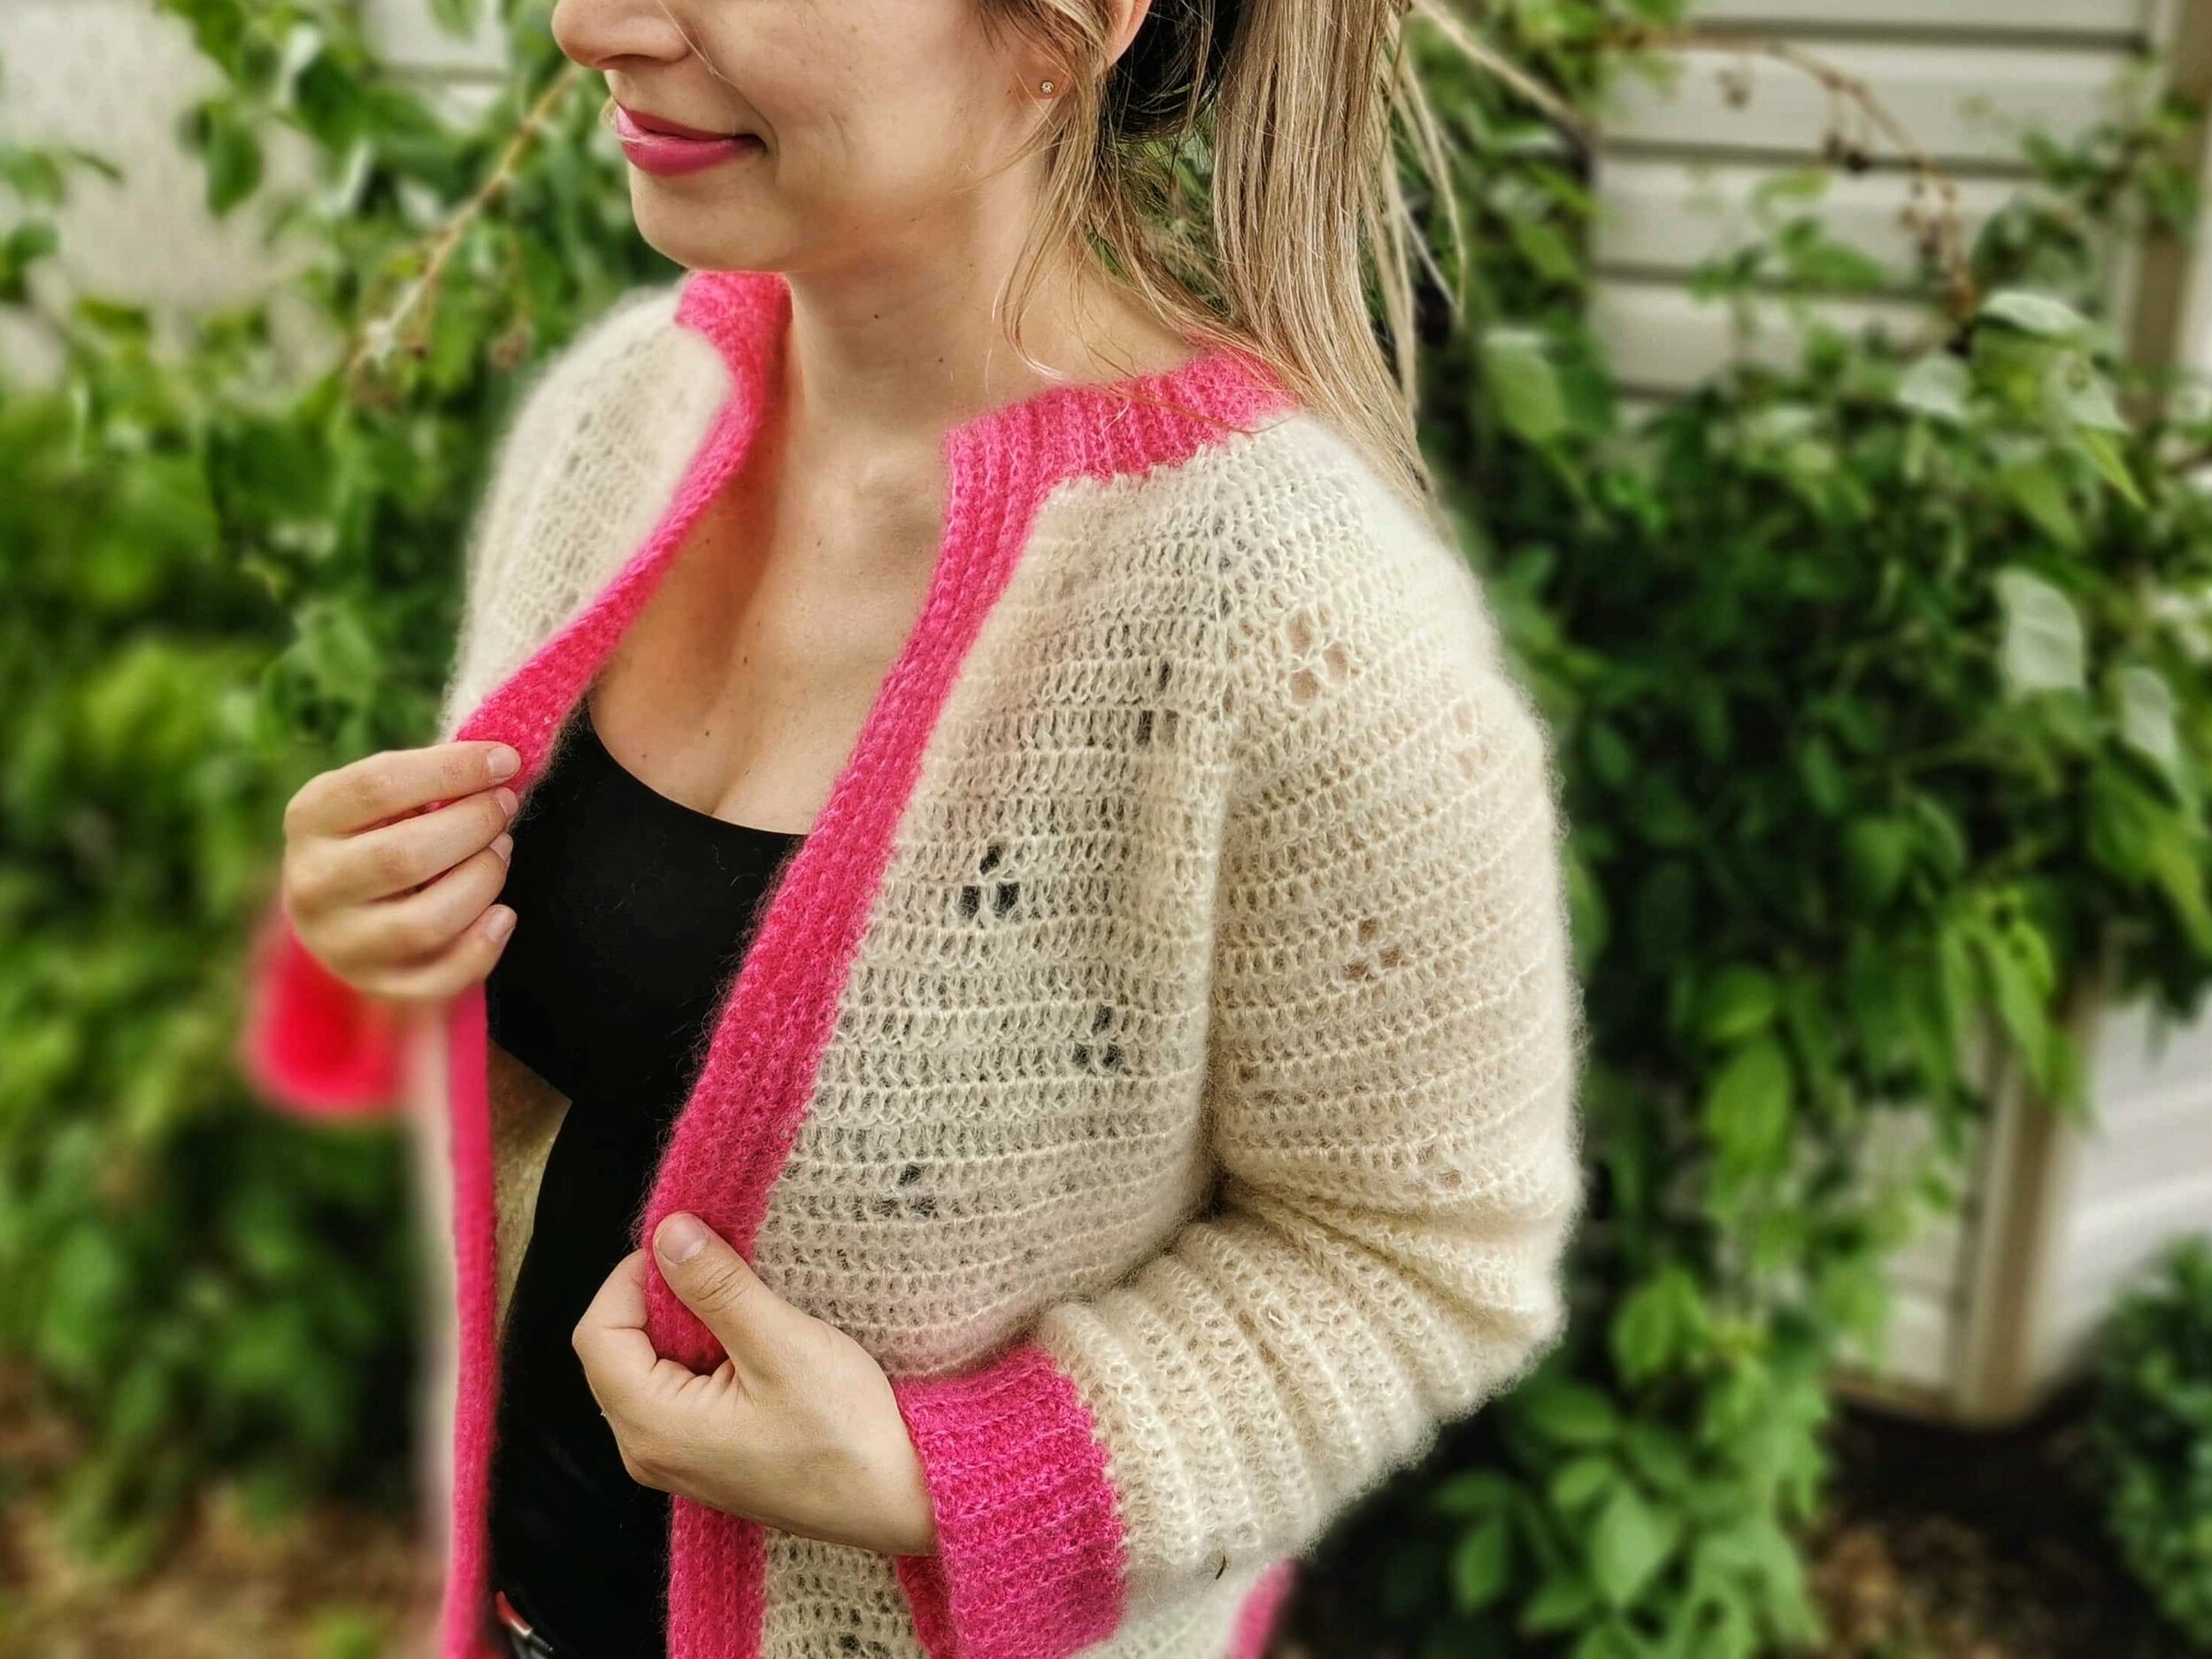 How to frog mohair + mohair cardigan crochet pattern — Coffee